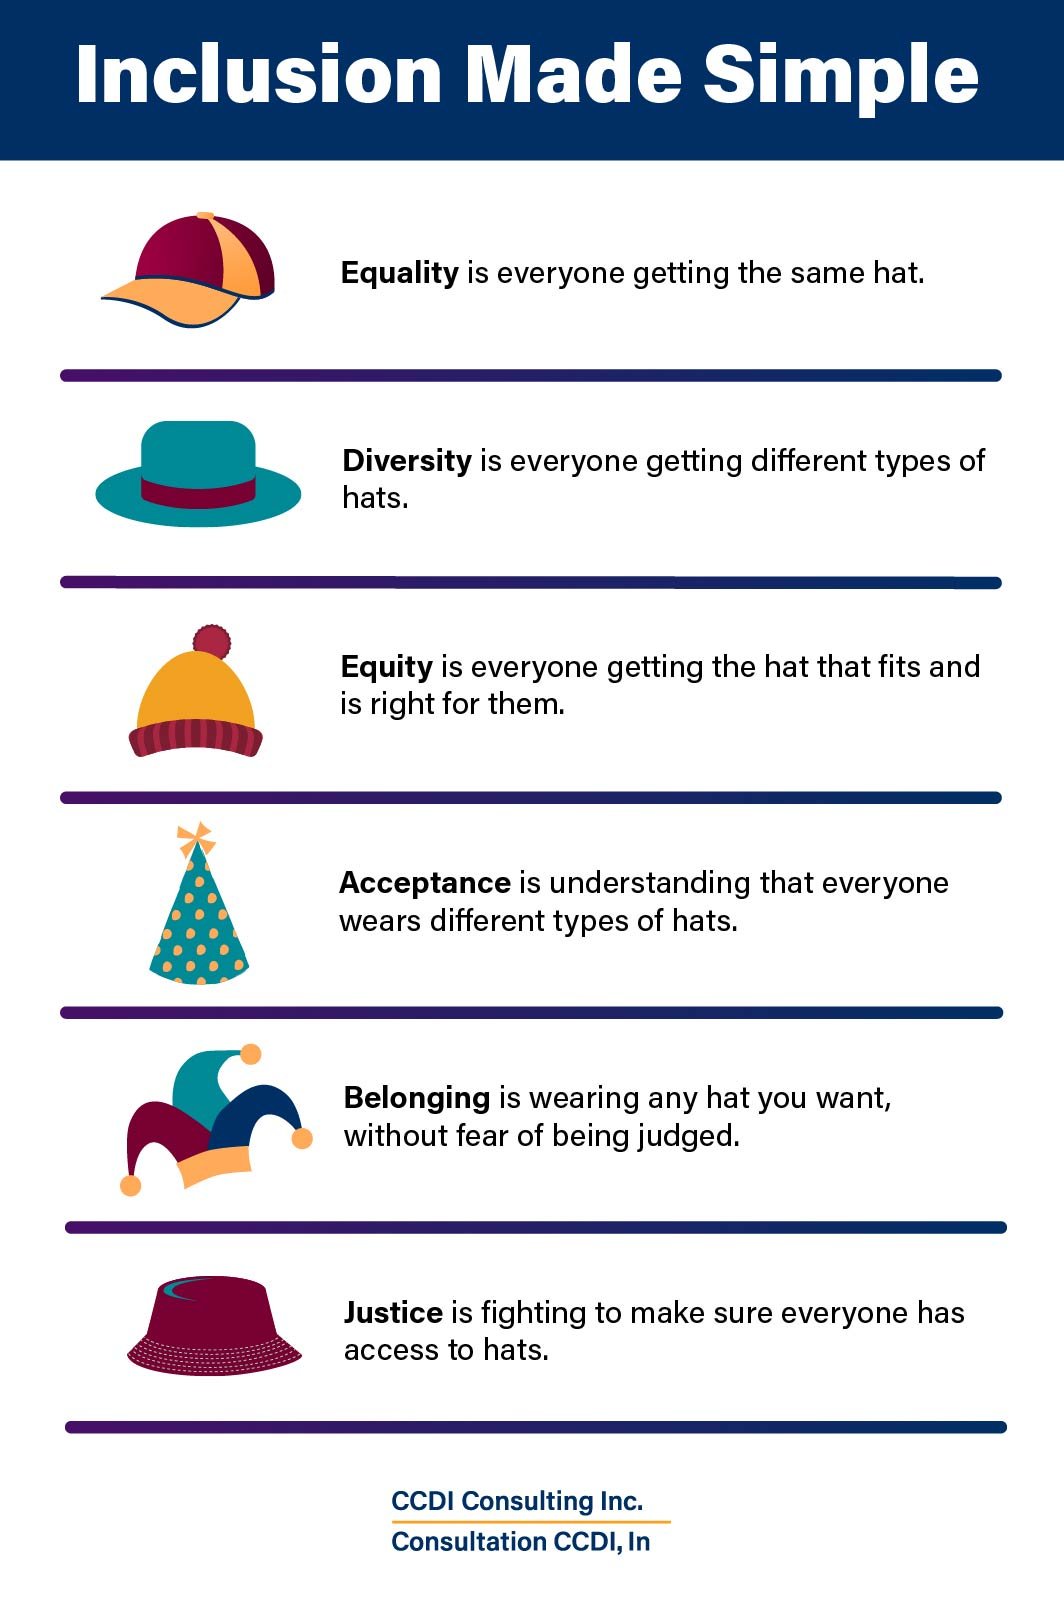 Inclusion Made Simple Infographic